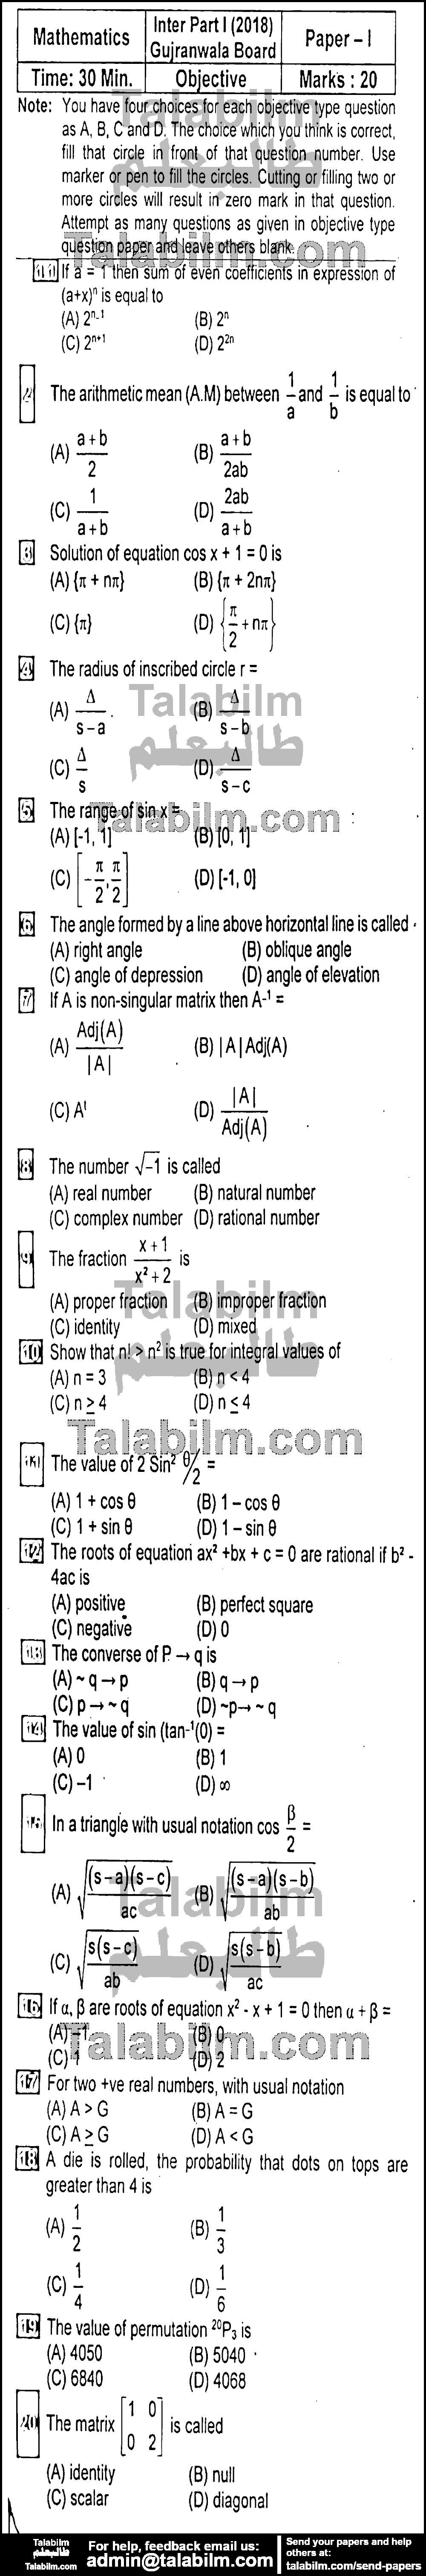 Math 0 past paper for Group-I 2018